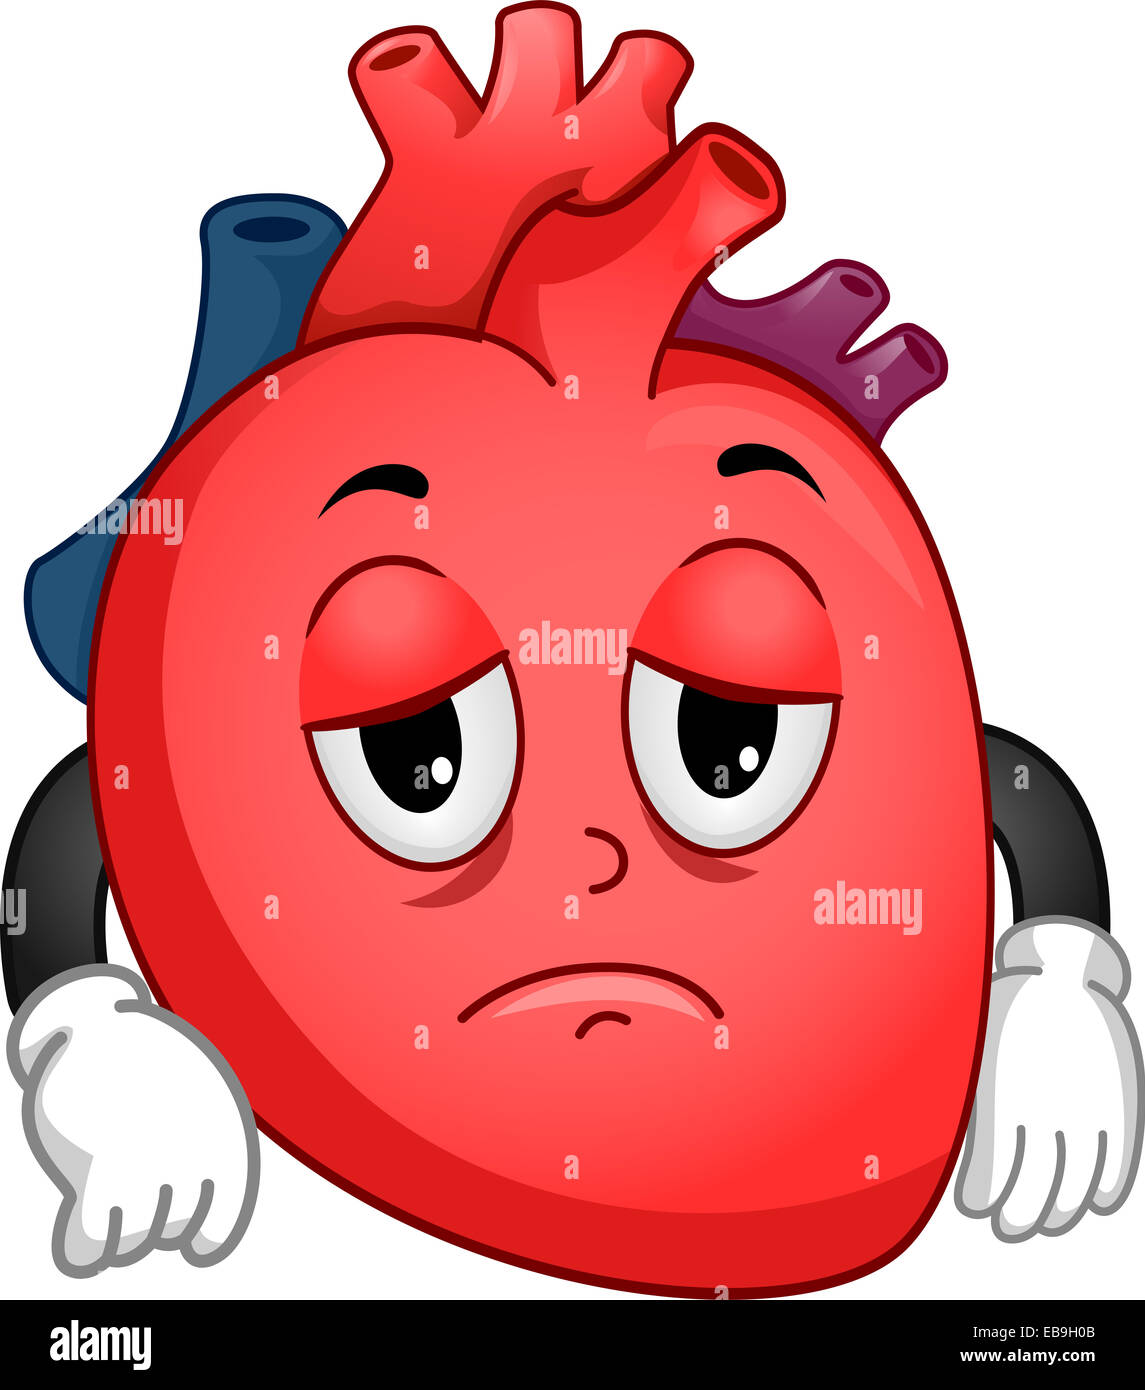 Mascot Illustration Featuring a Sad Worn Out Heart Stock Photo